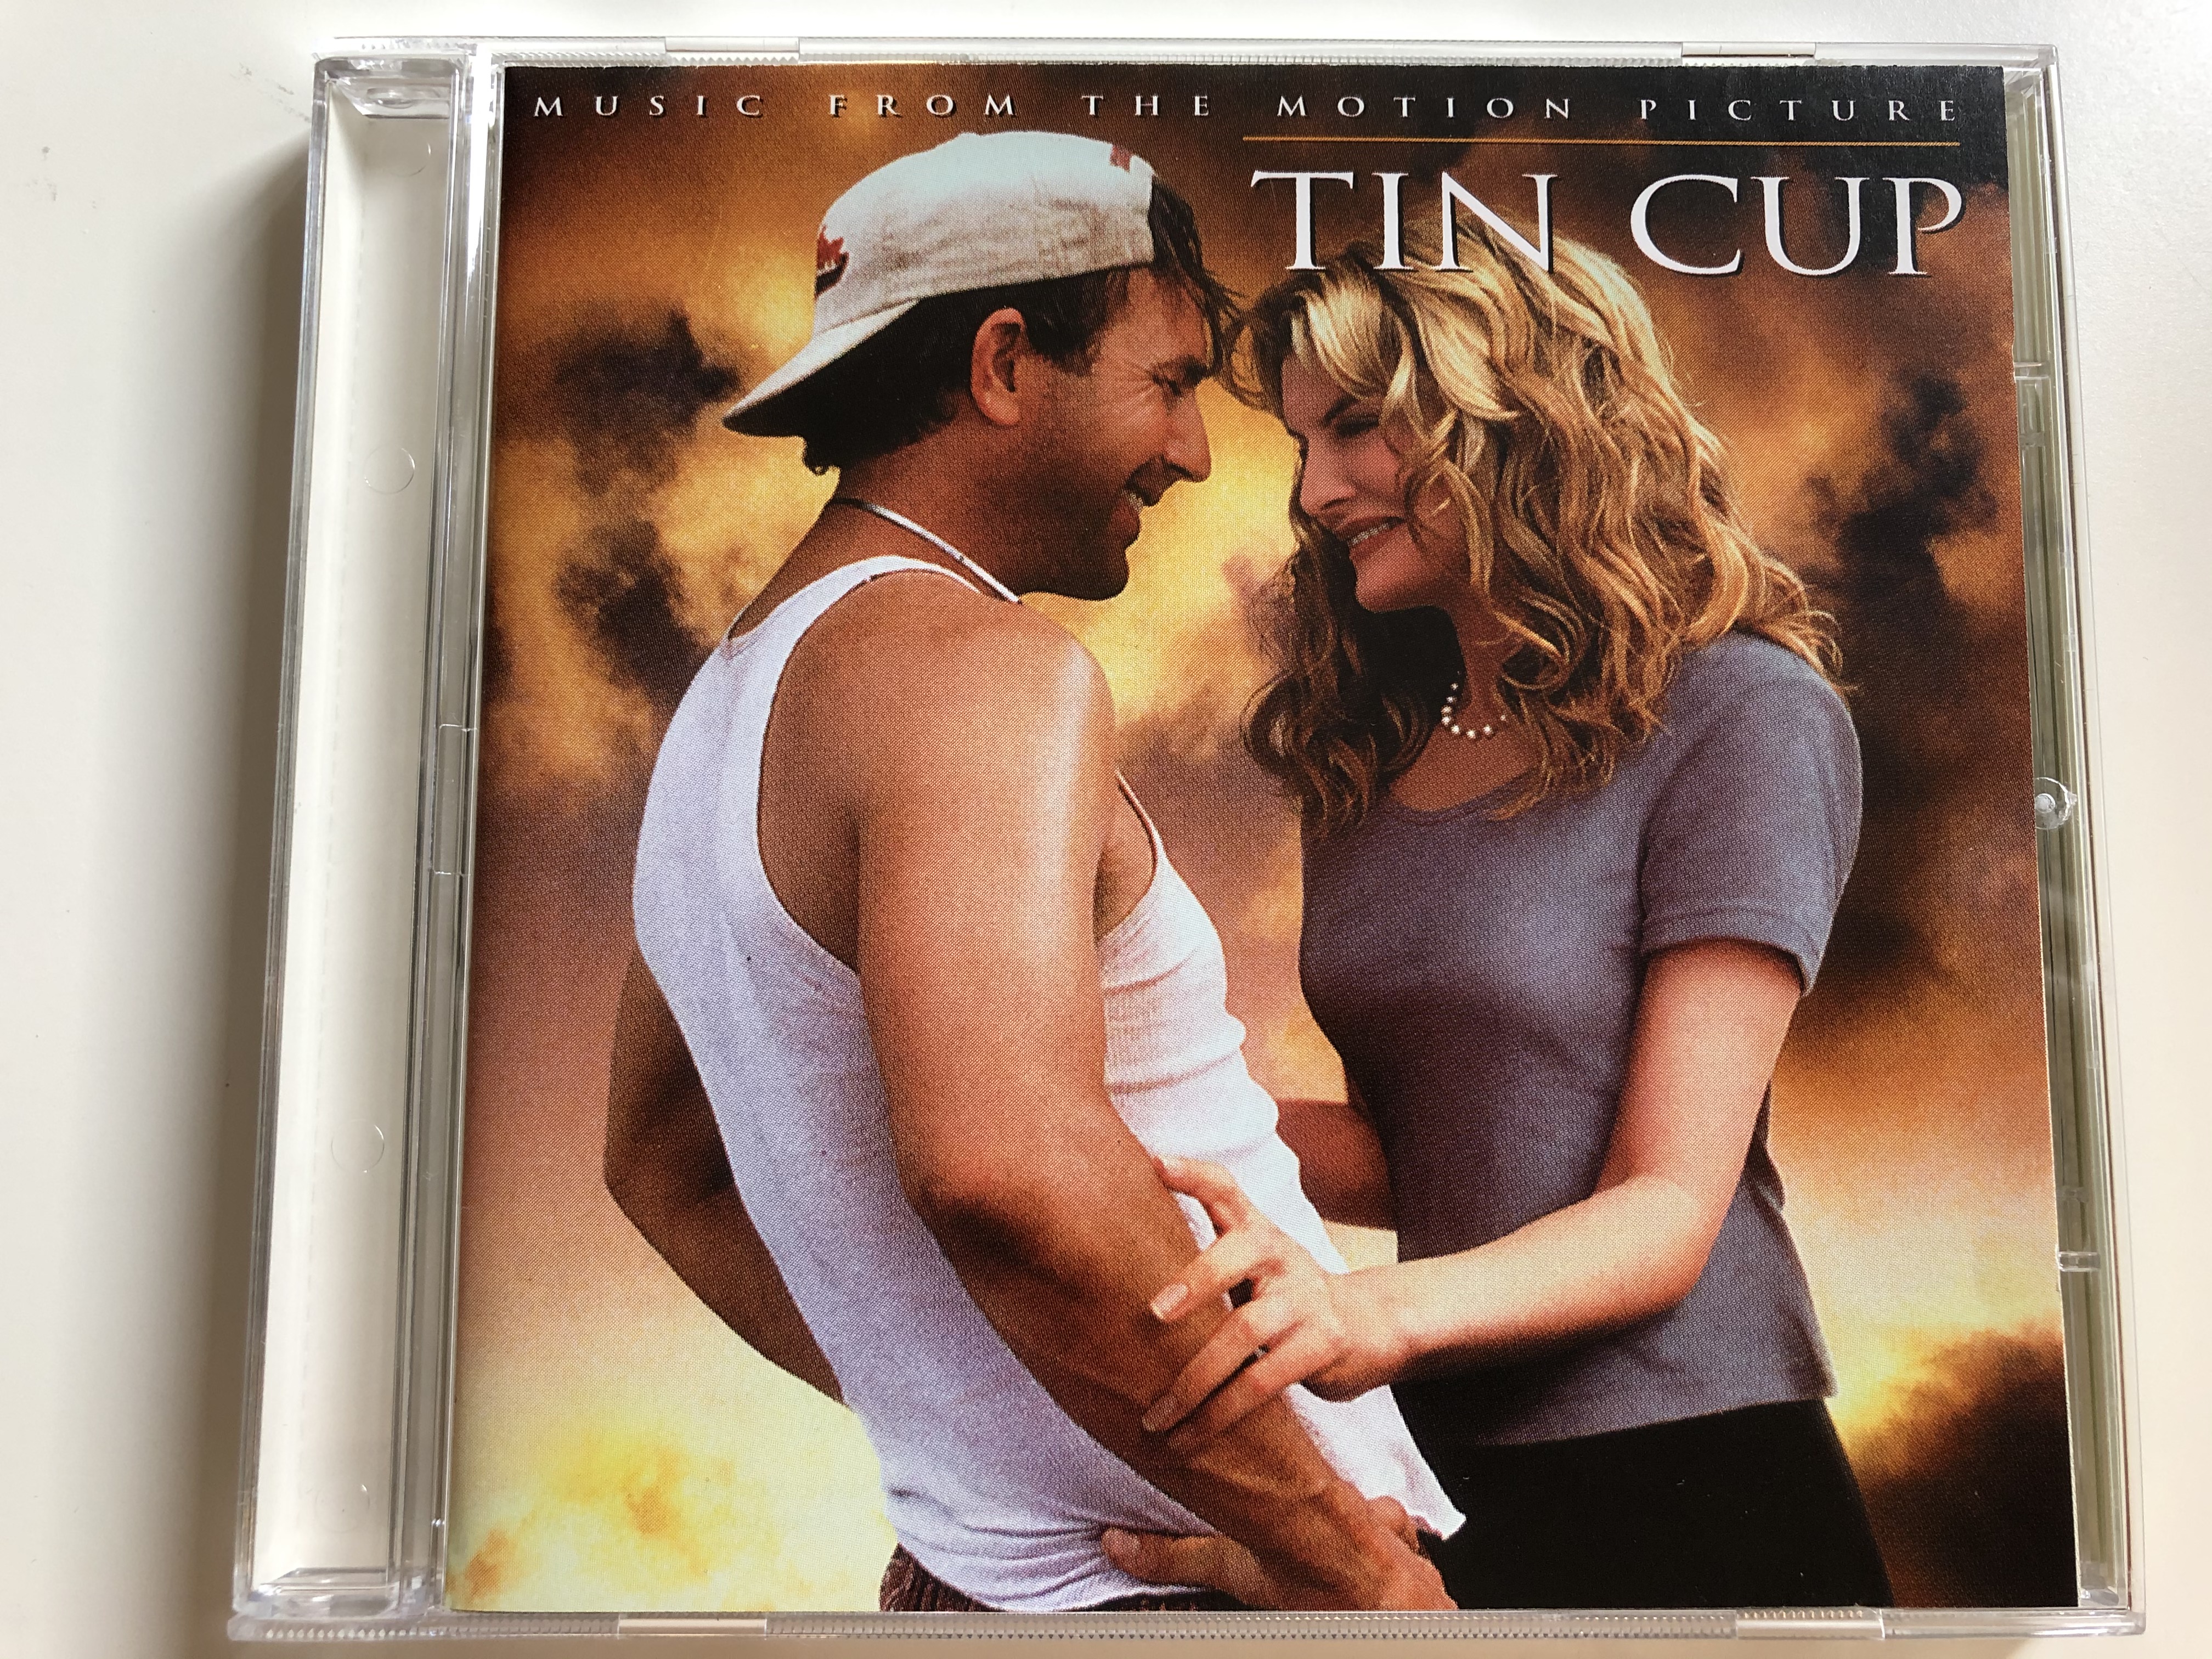 music-from-the-motion-picture-tin-cup-epic-soundtrax-audio-cd-1996-epc-484293-2-1-.jpg